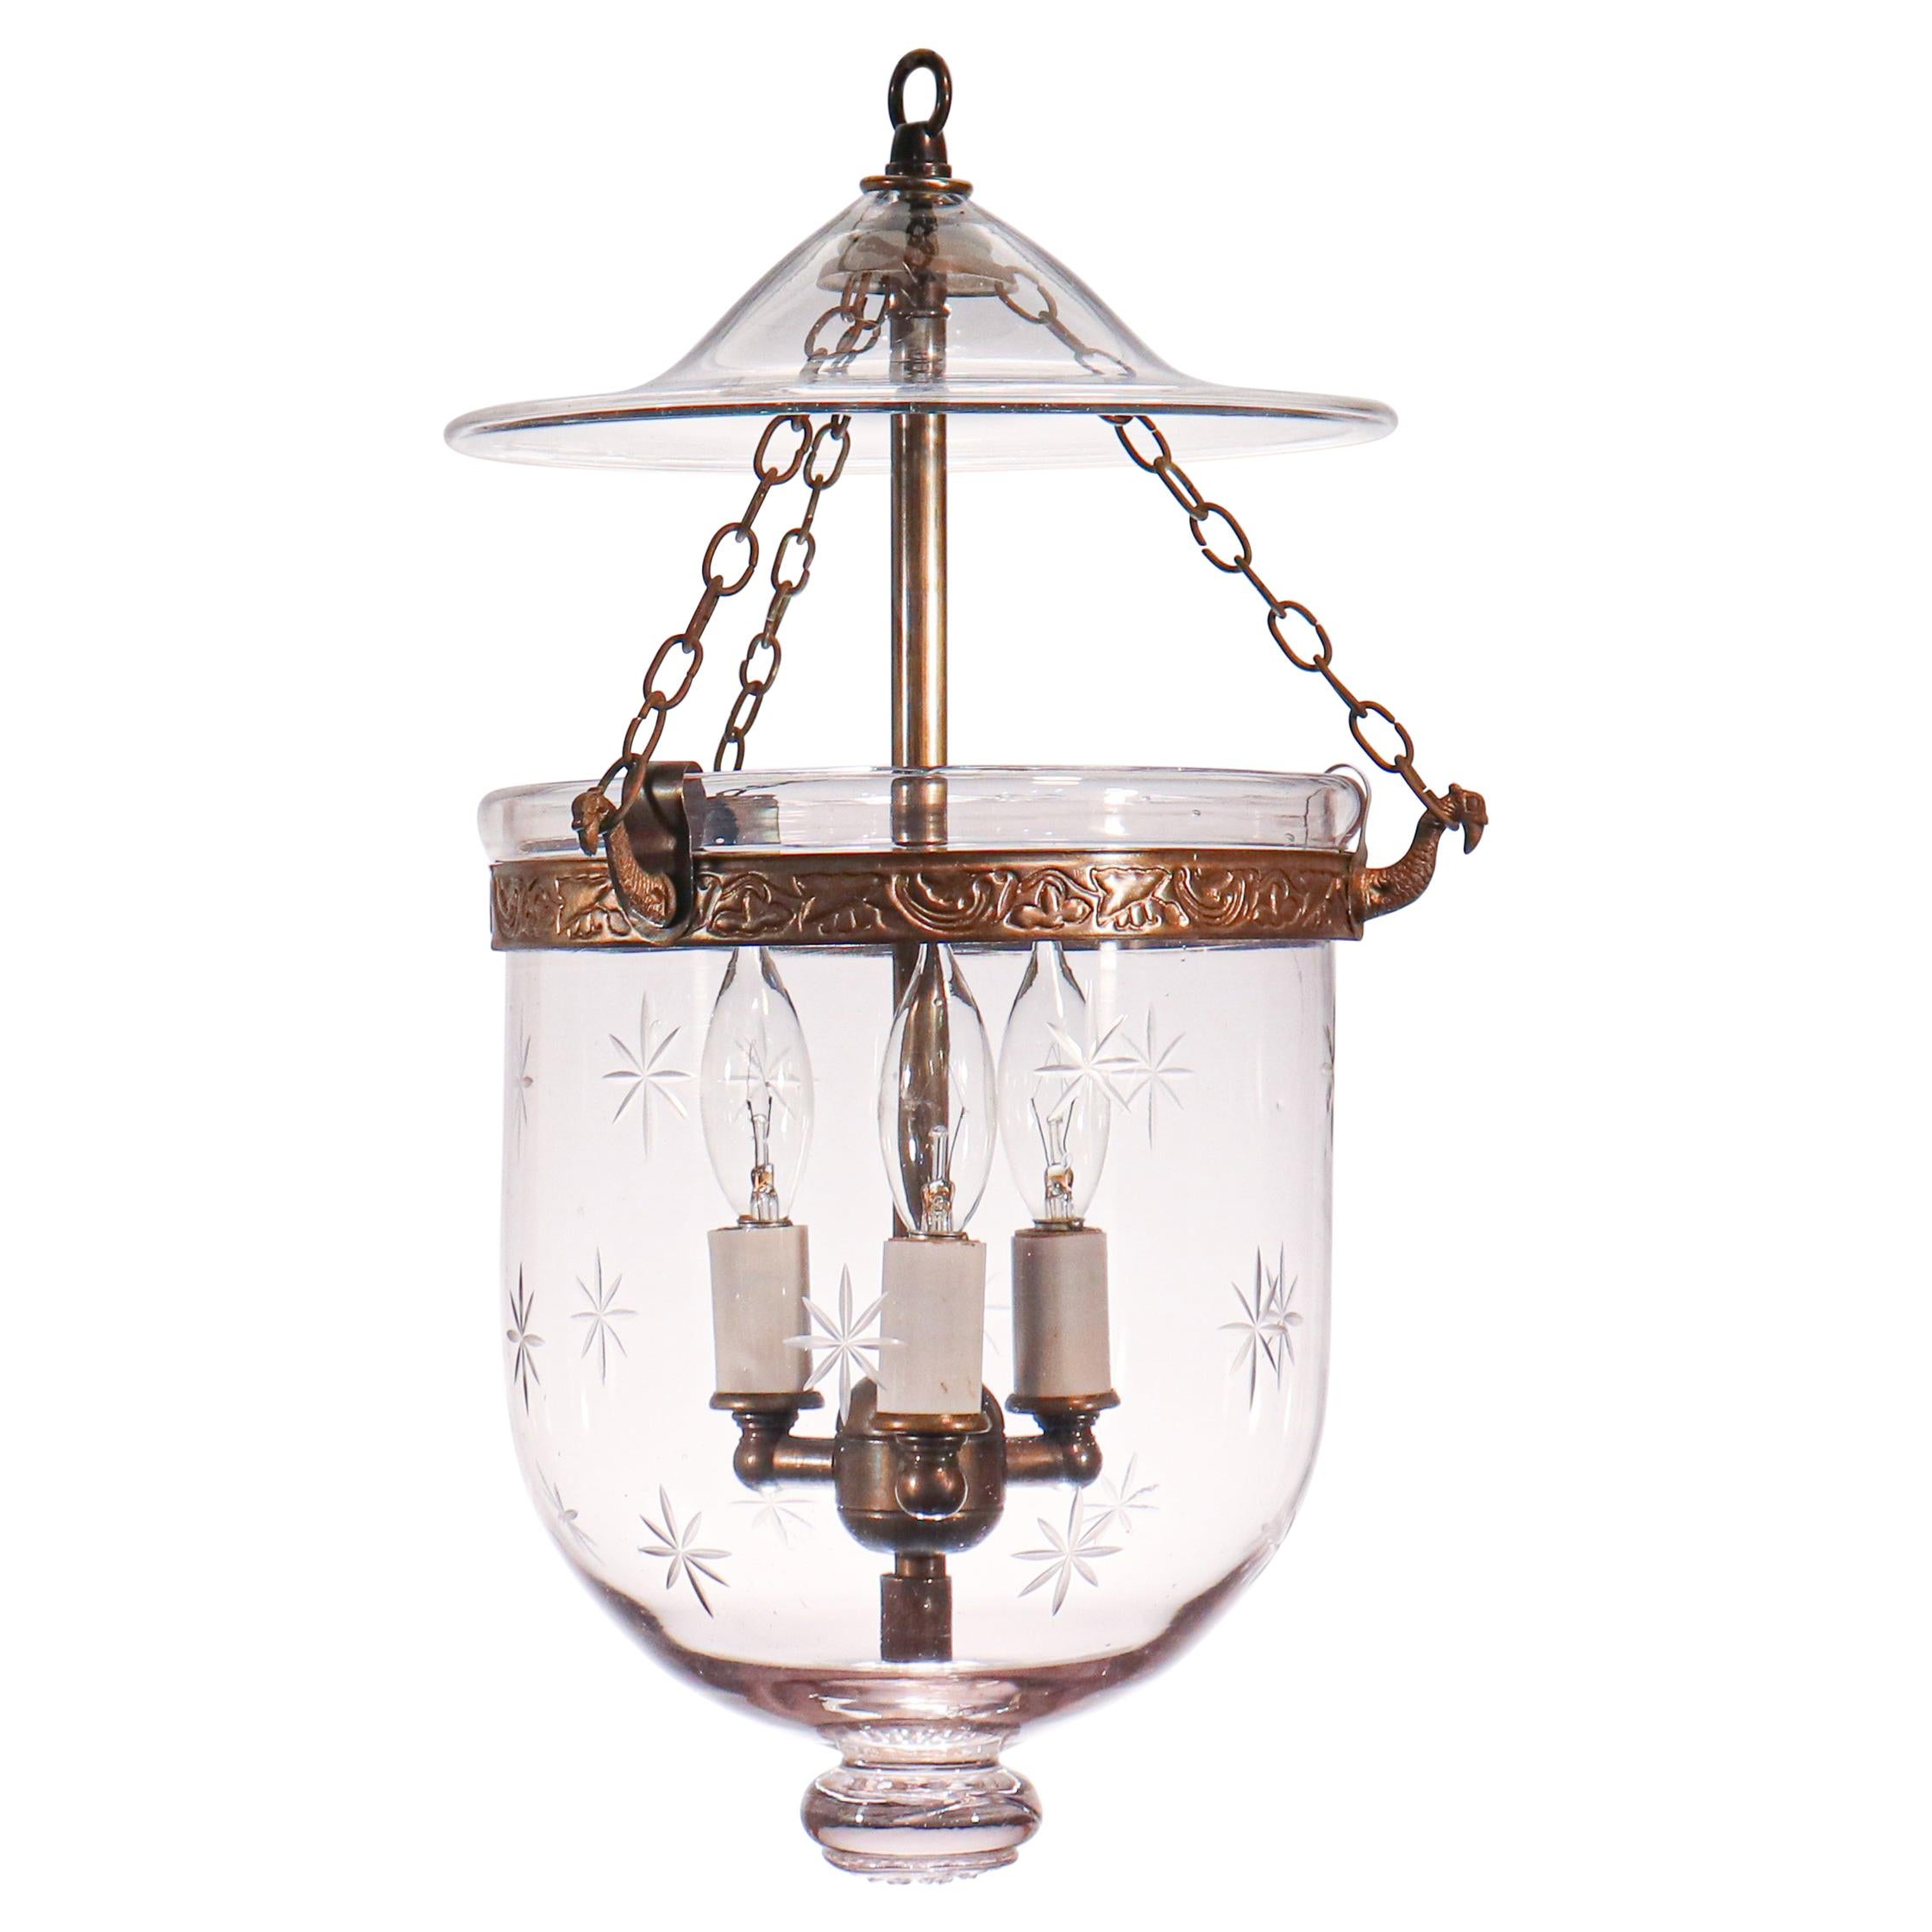 Antique Petite Bell Jar Lantern with Etched Stars